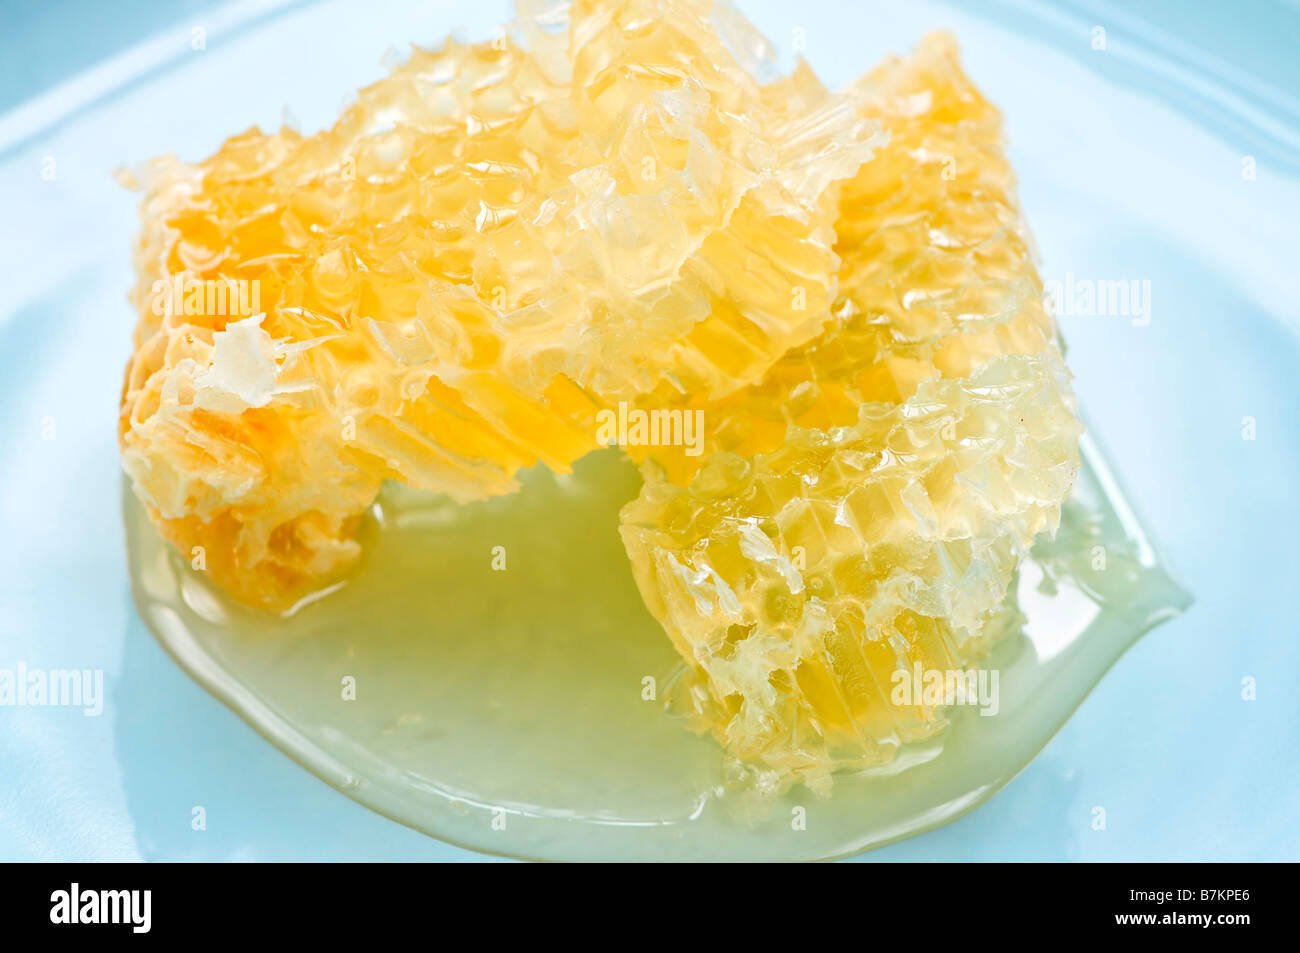 Fresh honey in honeycomb on a plate Stock Photo